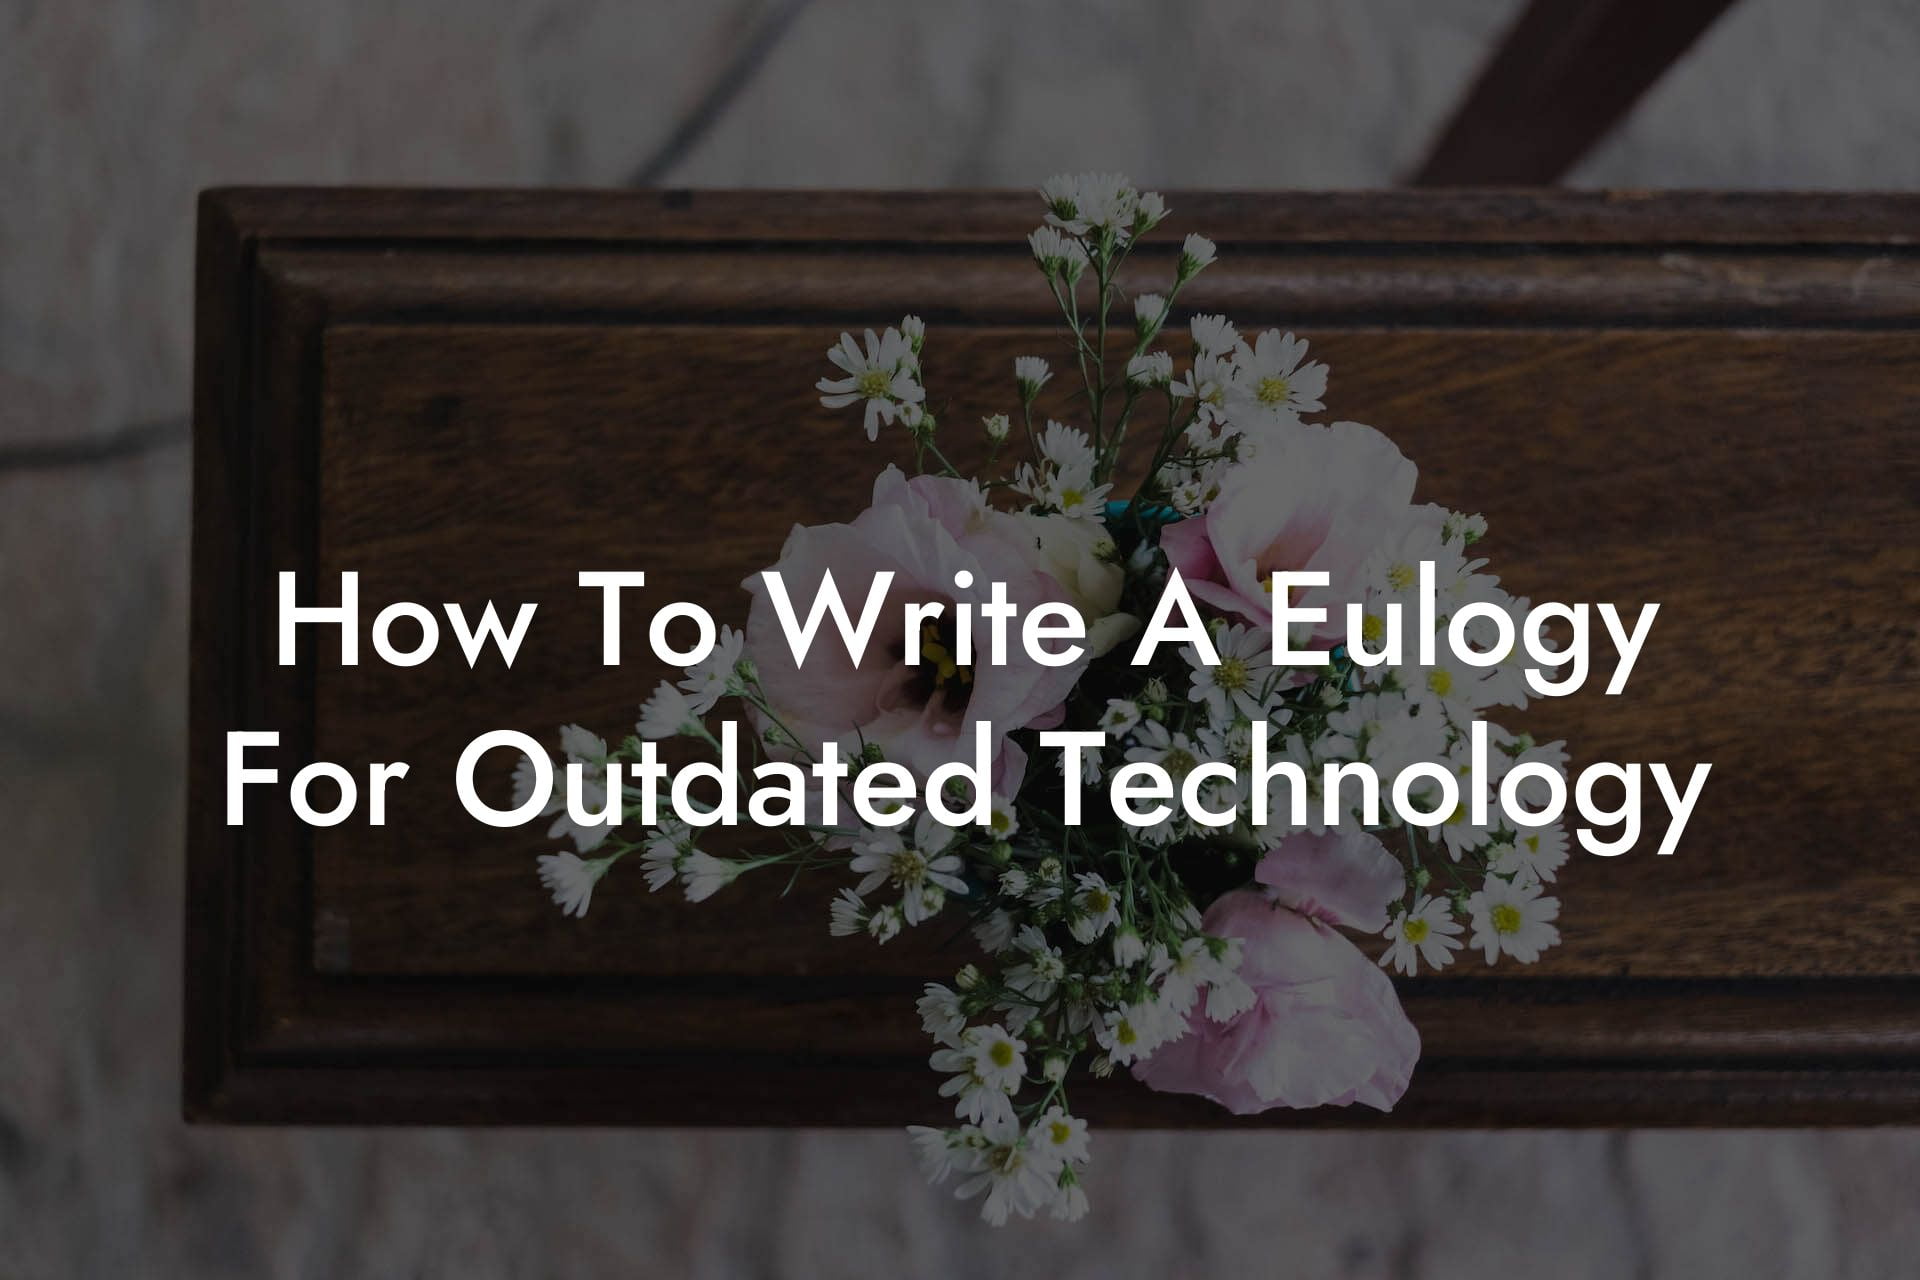 How To Write A Eulogy For Outdated Technology